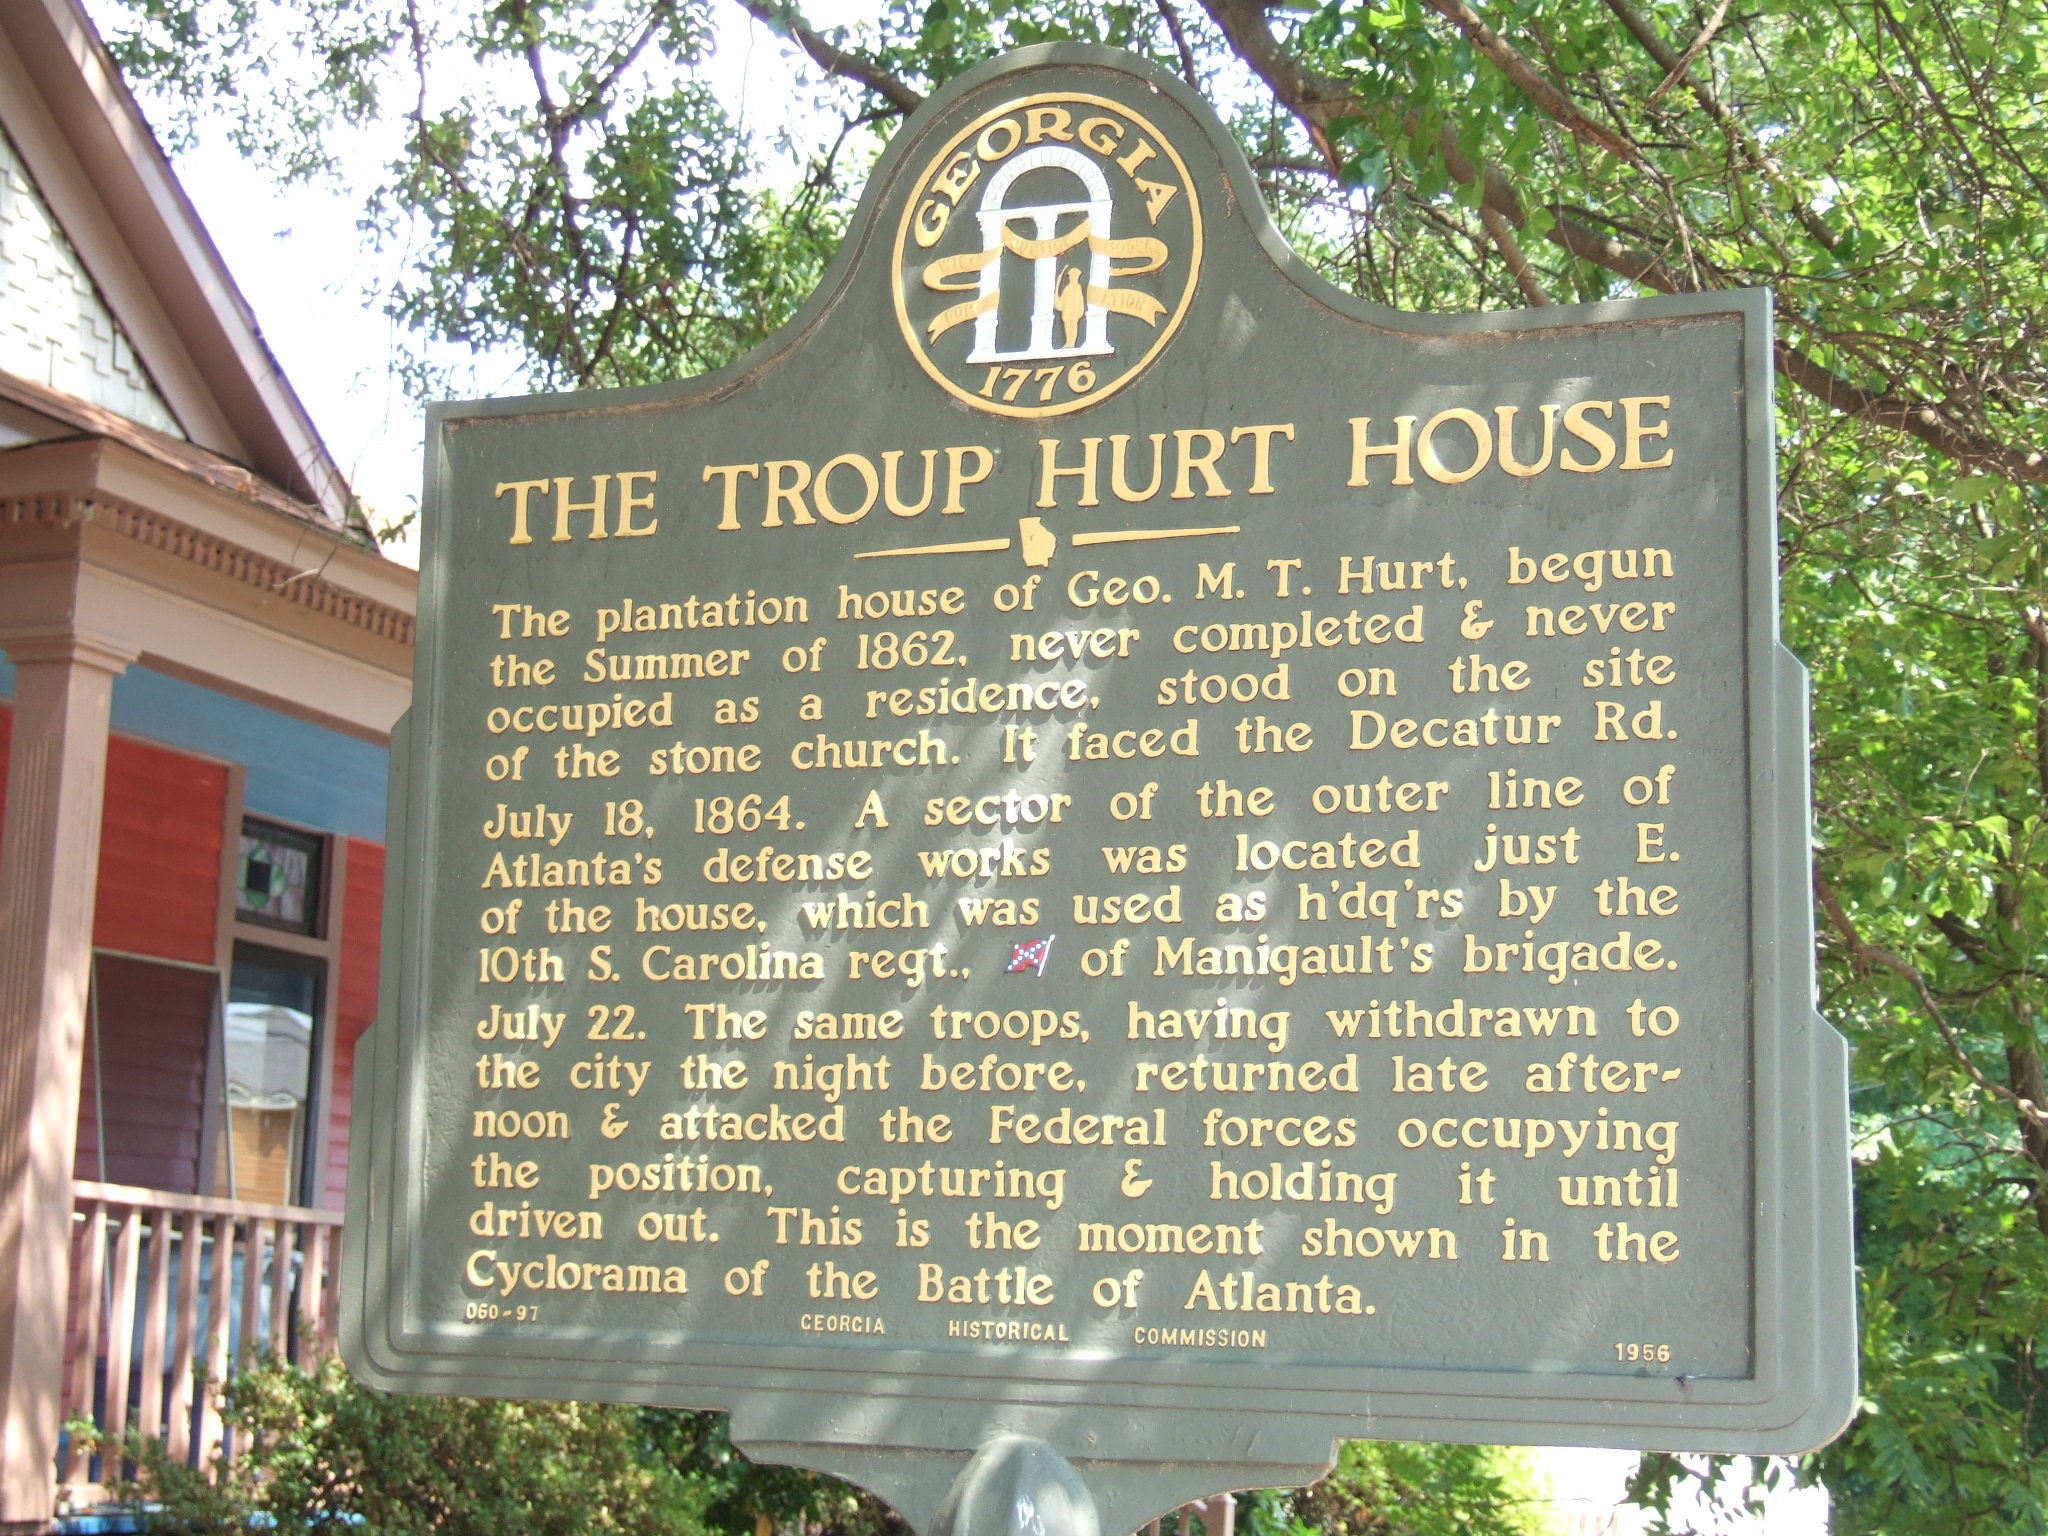 The Troup Hurt House Marker